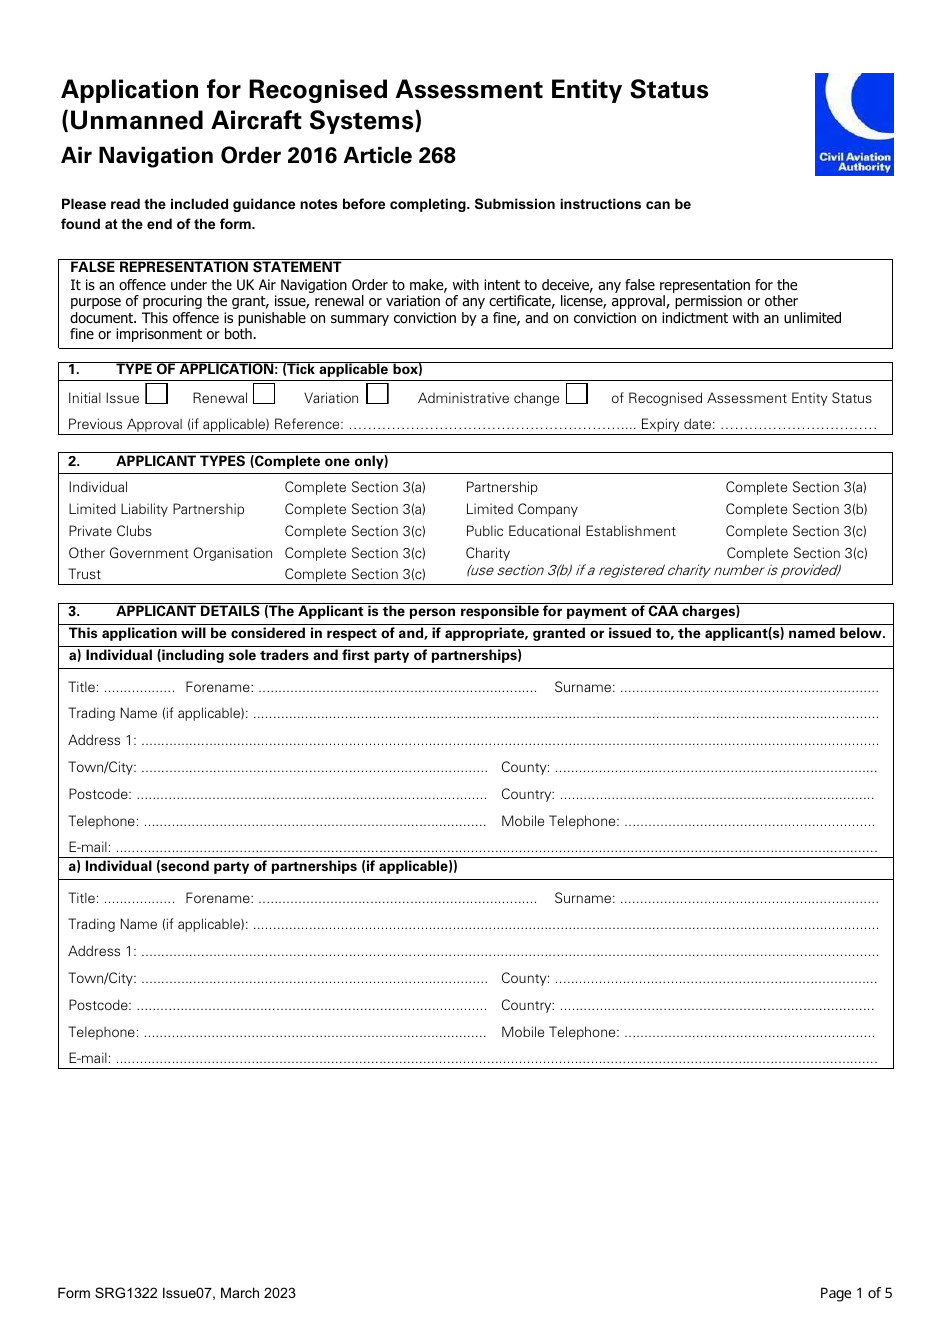 Form SRG1322 Application for Recognised Assessment Entity Status (Unmanned Aircraft Systems) - United Kingdom, Page 1